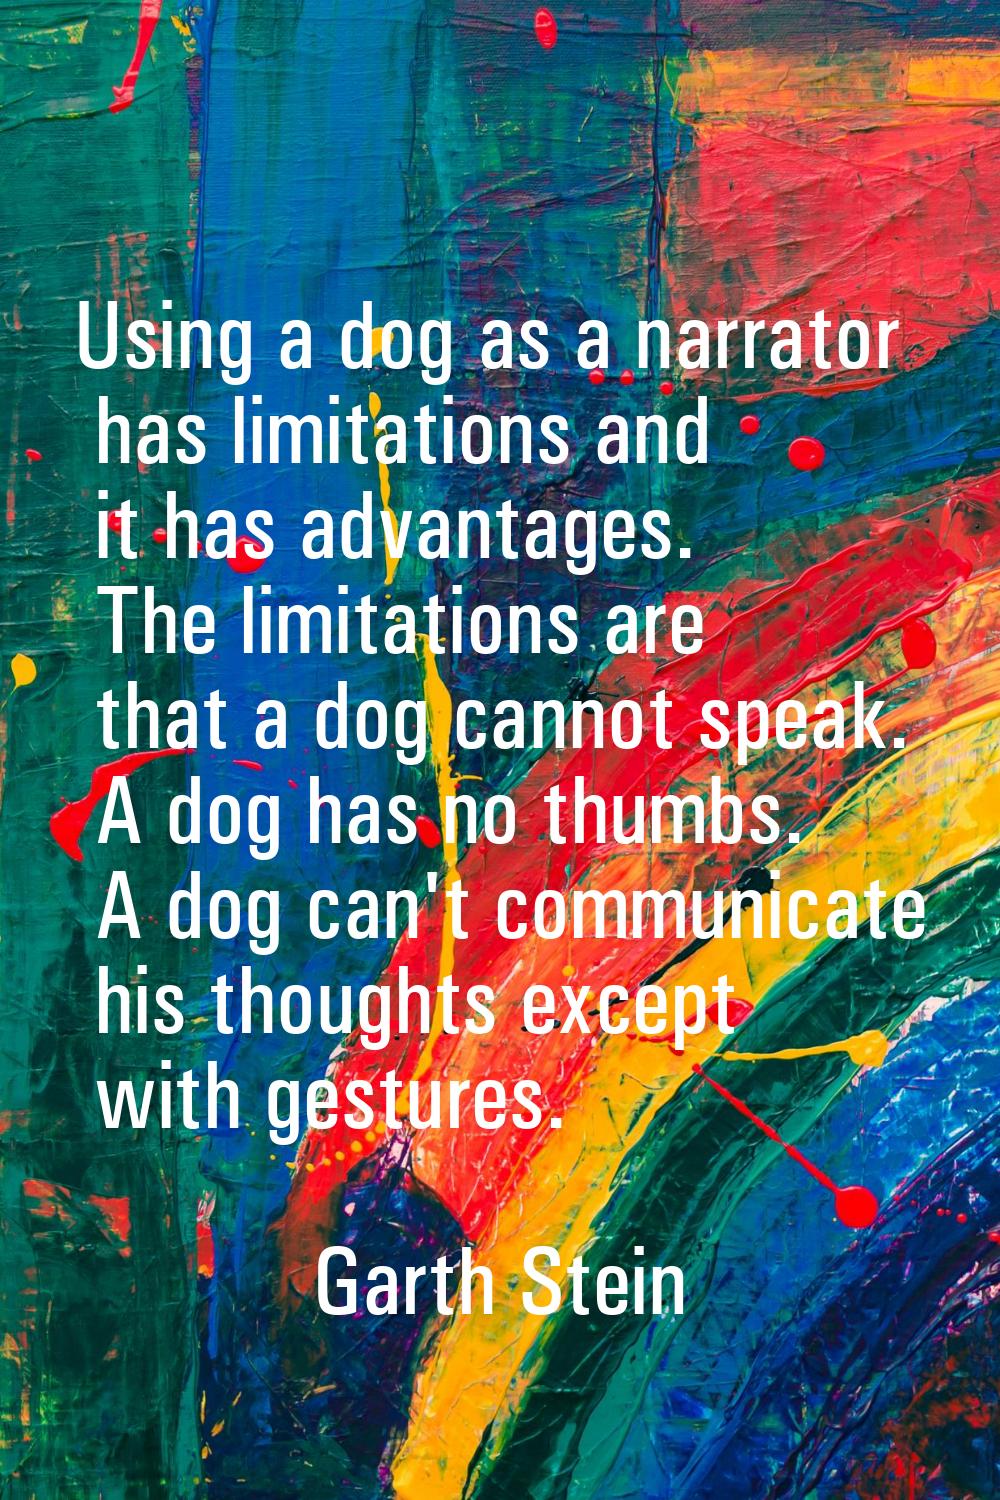 Using a dog as a narrator has limitations and it has advantages. The limitations are that a dog can